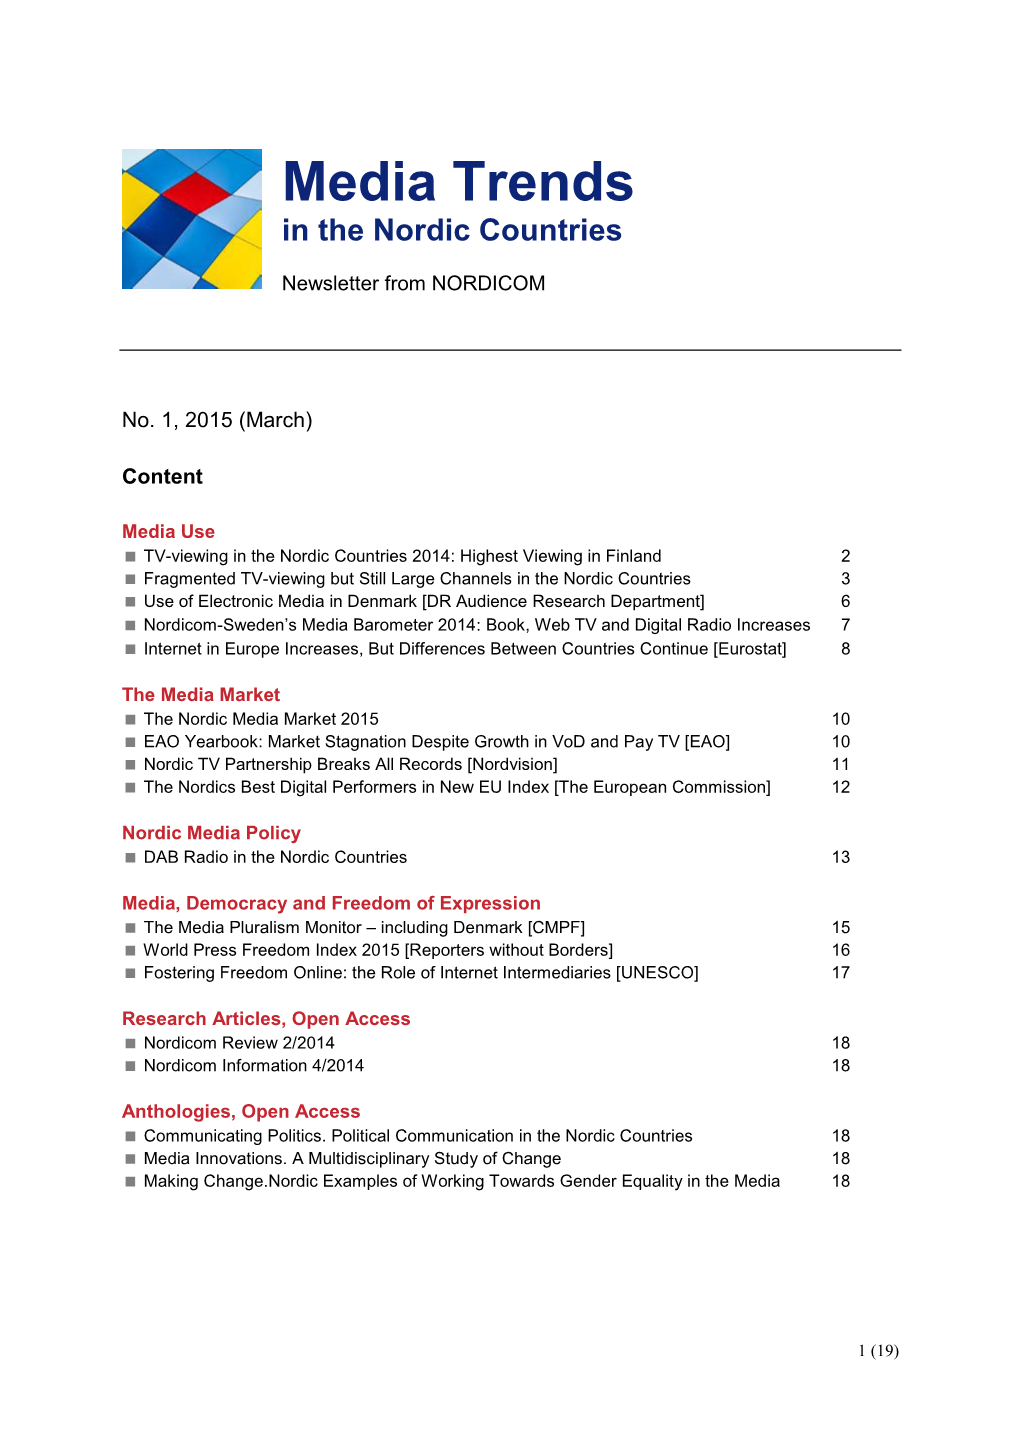 Media Trends in the Nordic Countries 2015